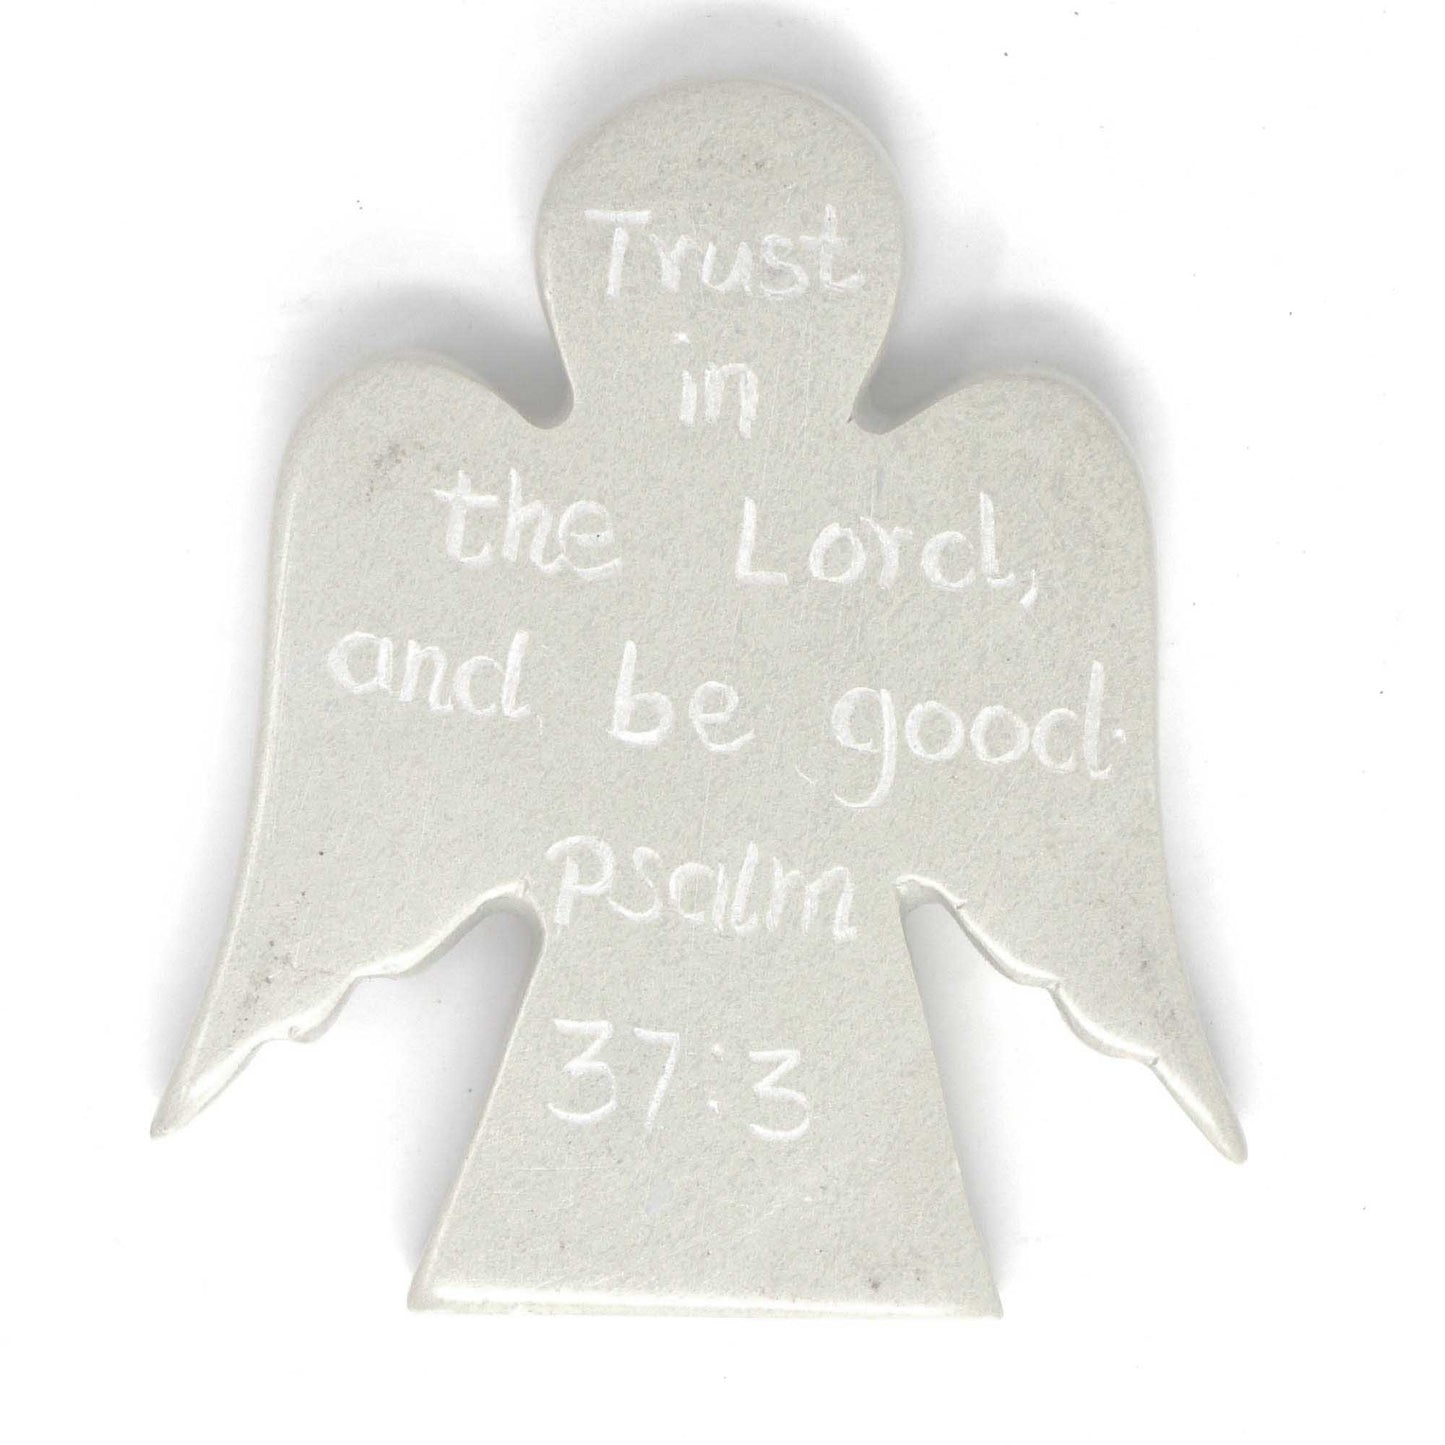 angel-devotional-tokens-with-psalm-inscriptions-set-of-2